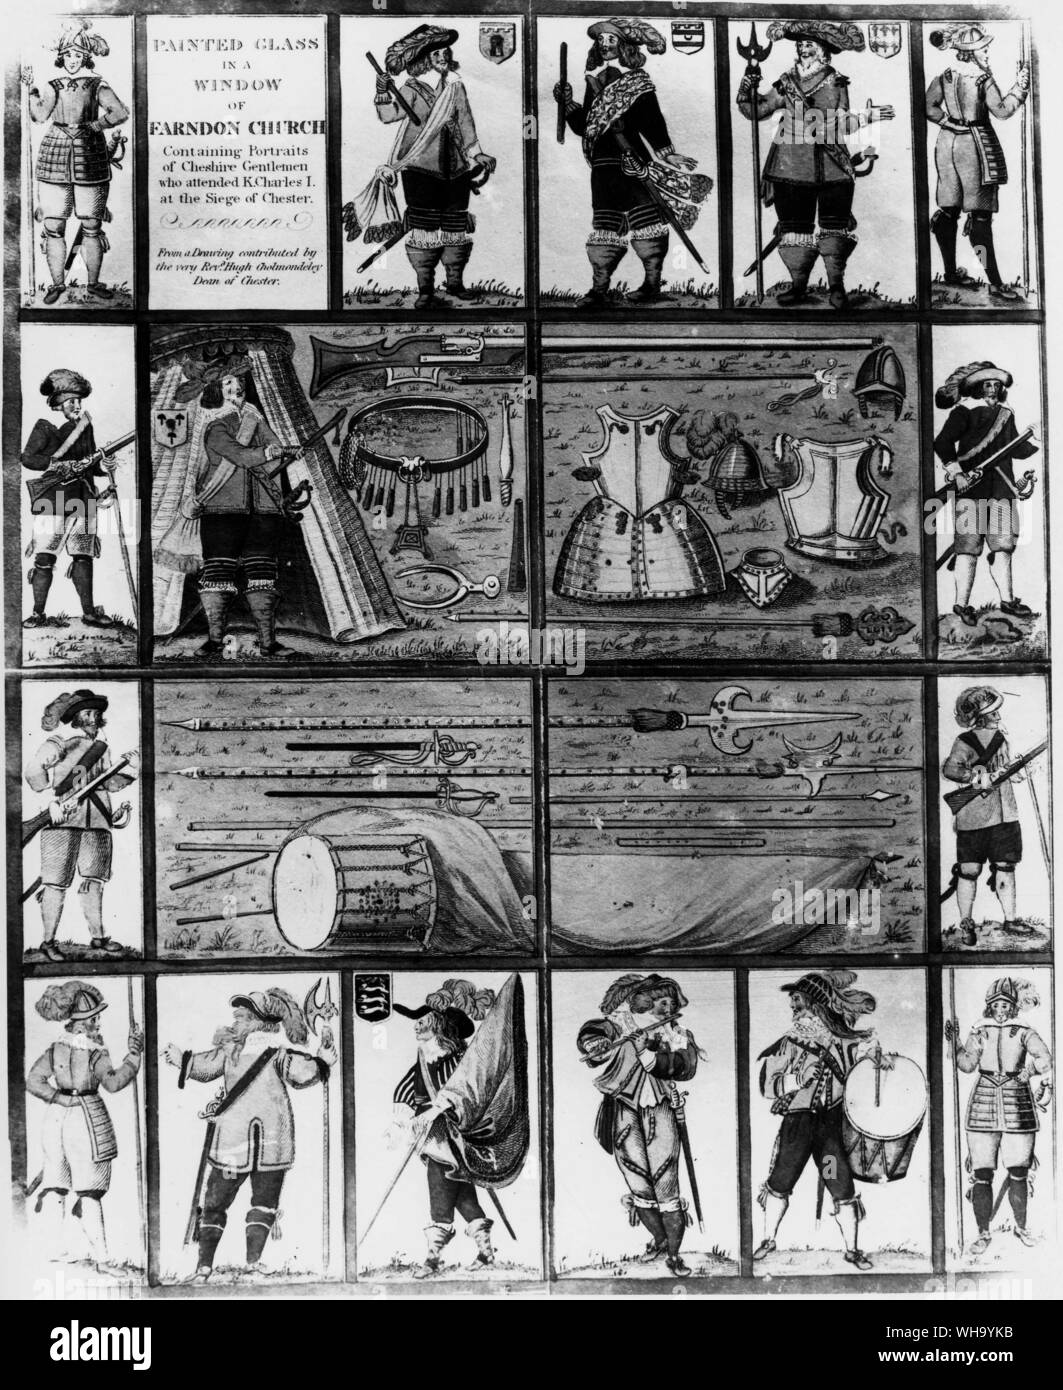 Drawing of painted glass at Farndon of Military men in uniform. Possibly 17th century. Stock Photo